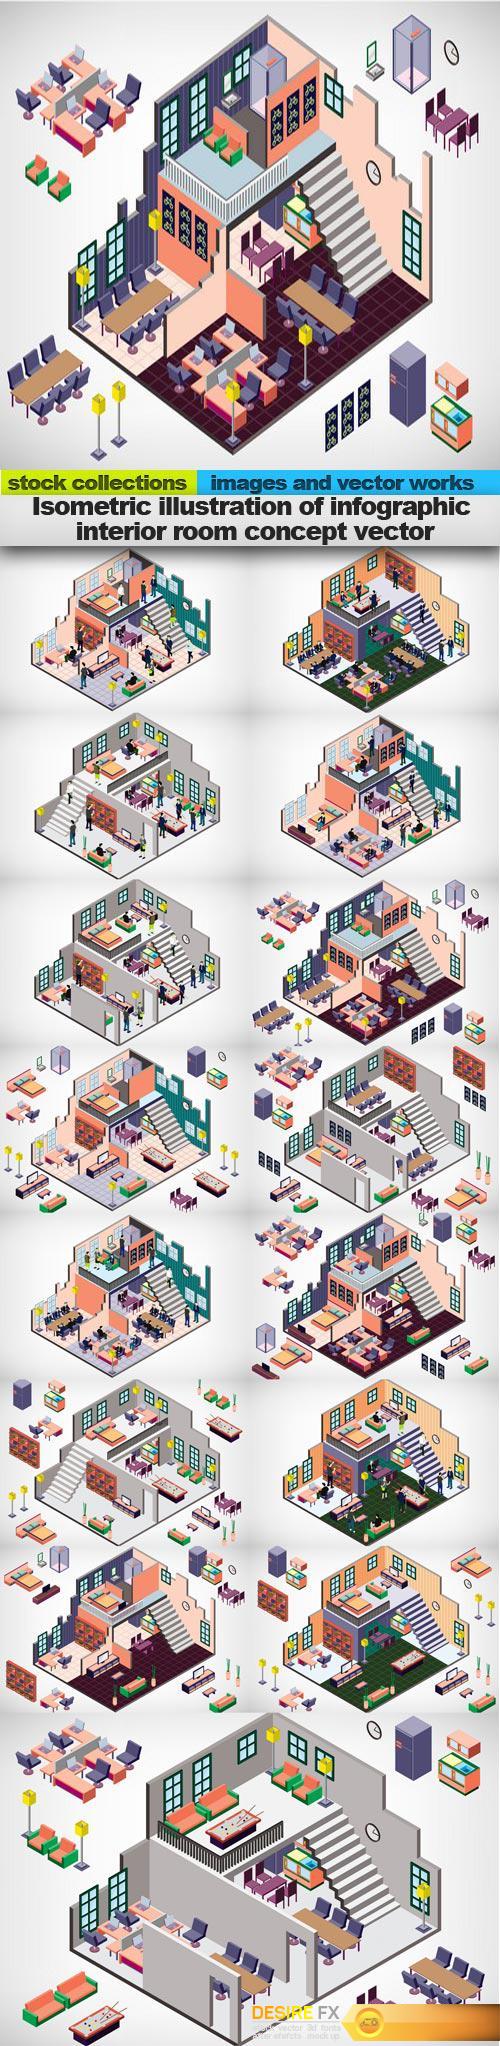 Isometric illustration of infographic interior room concept vector, 15 EPS